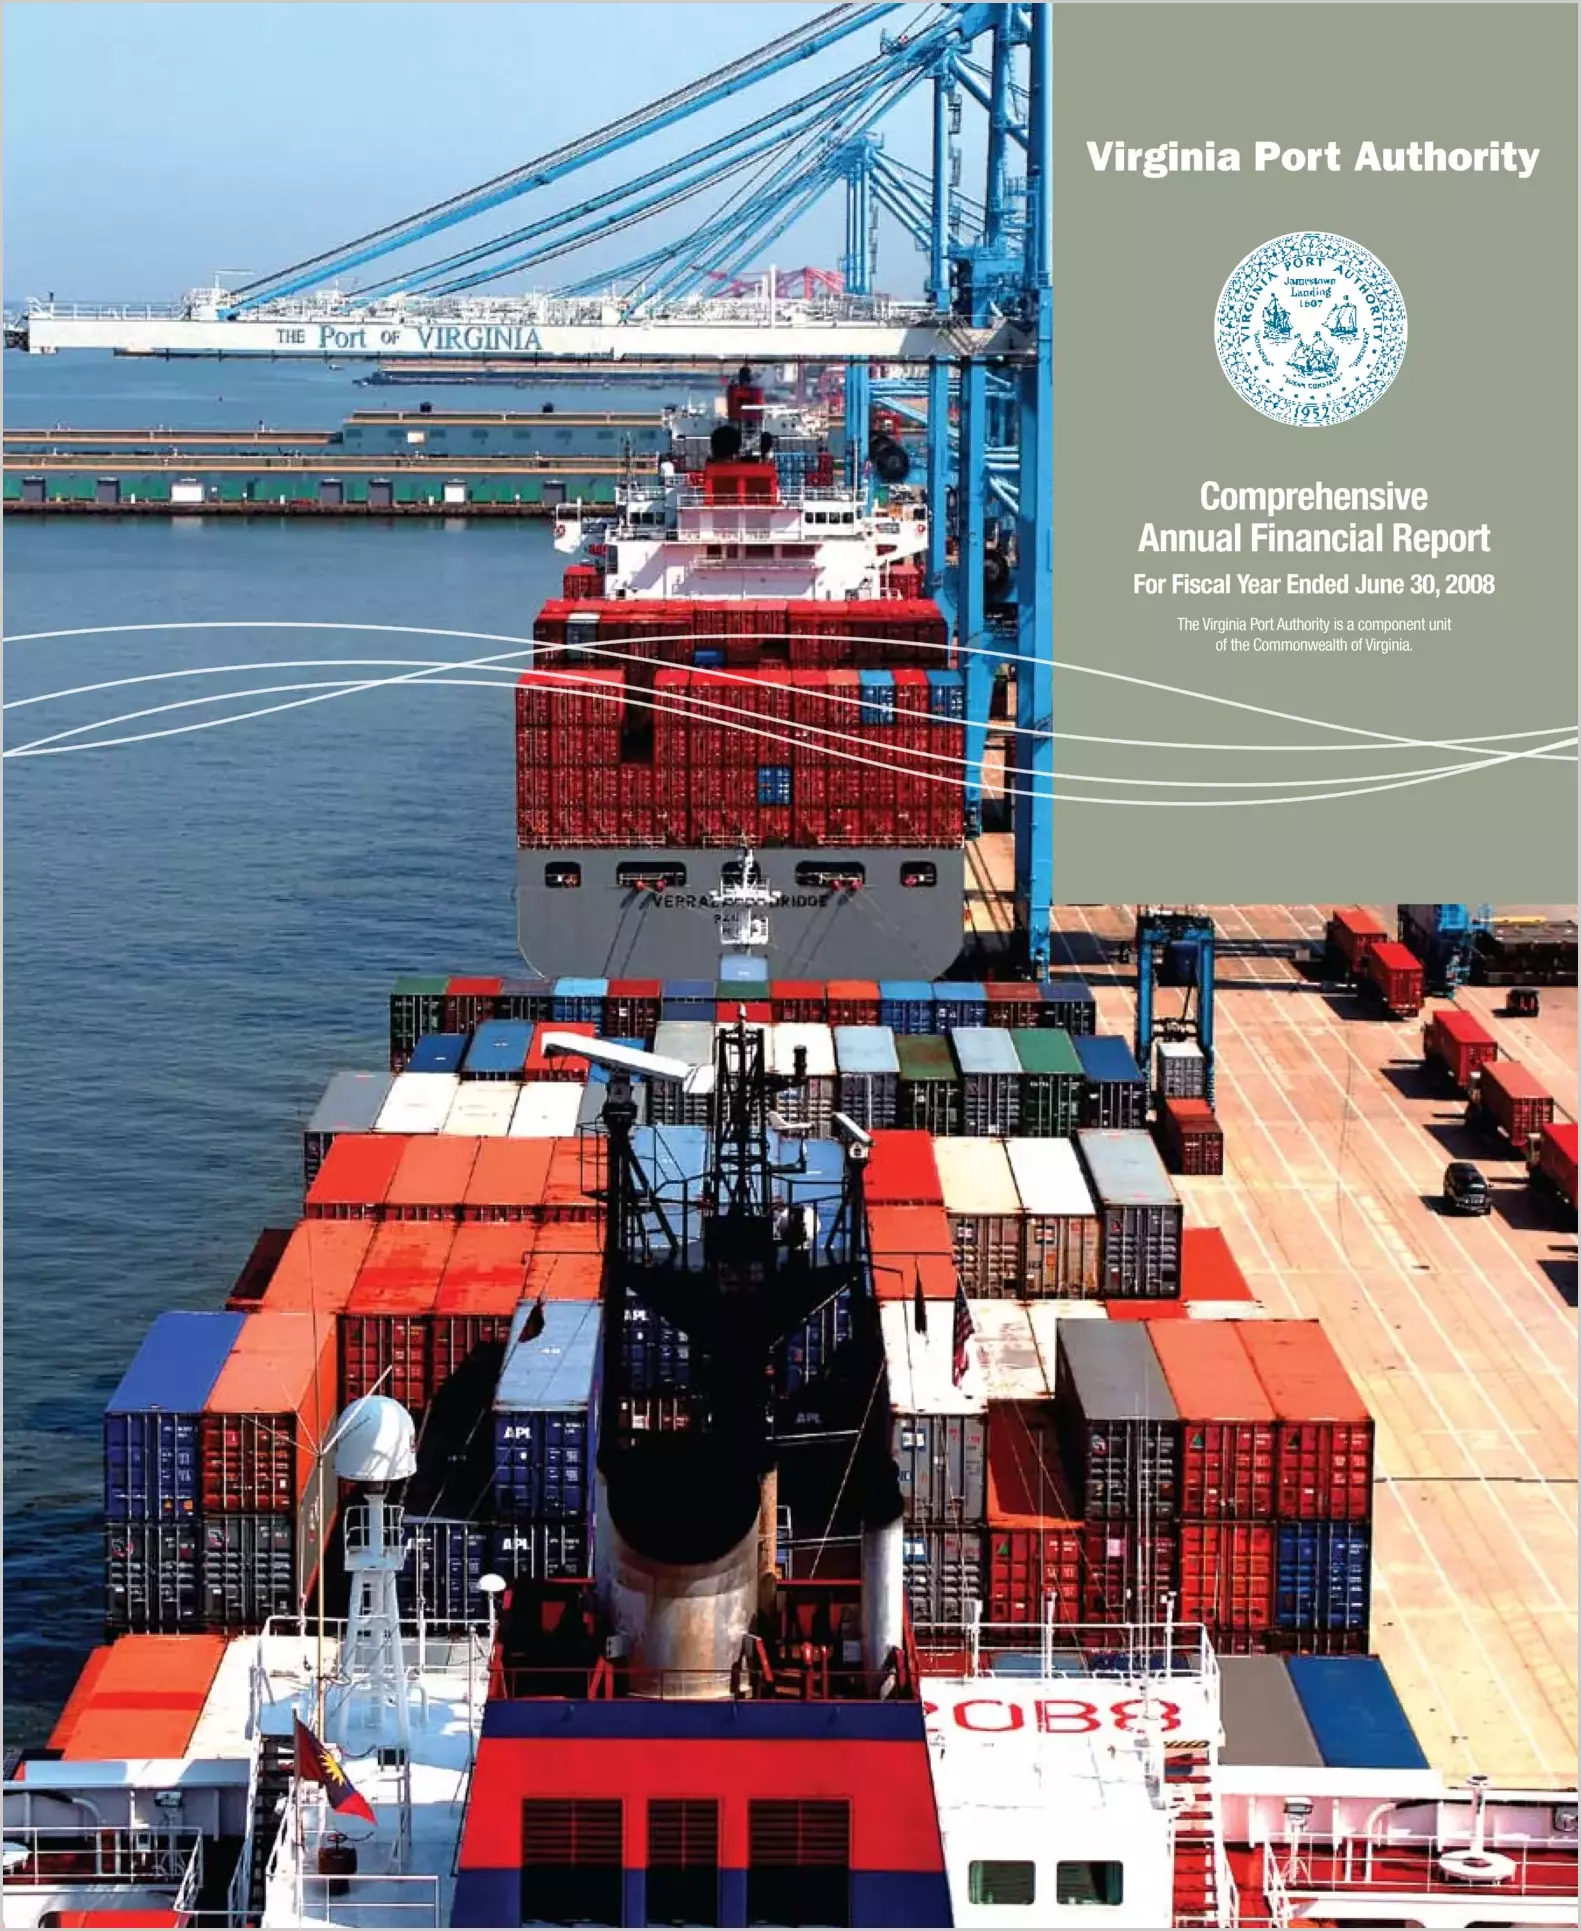 Virginia Port Authority Annual Financial Report for the year ended June 30, 2008